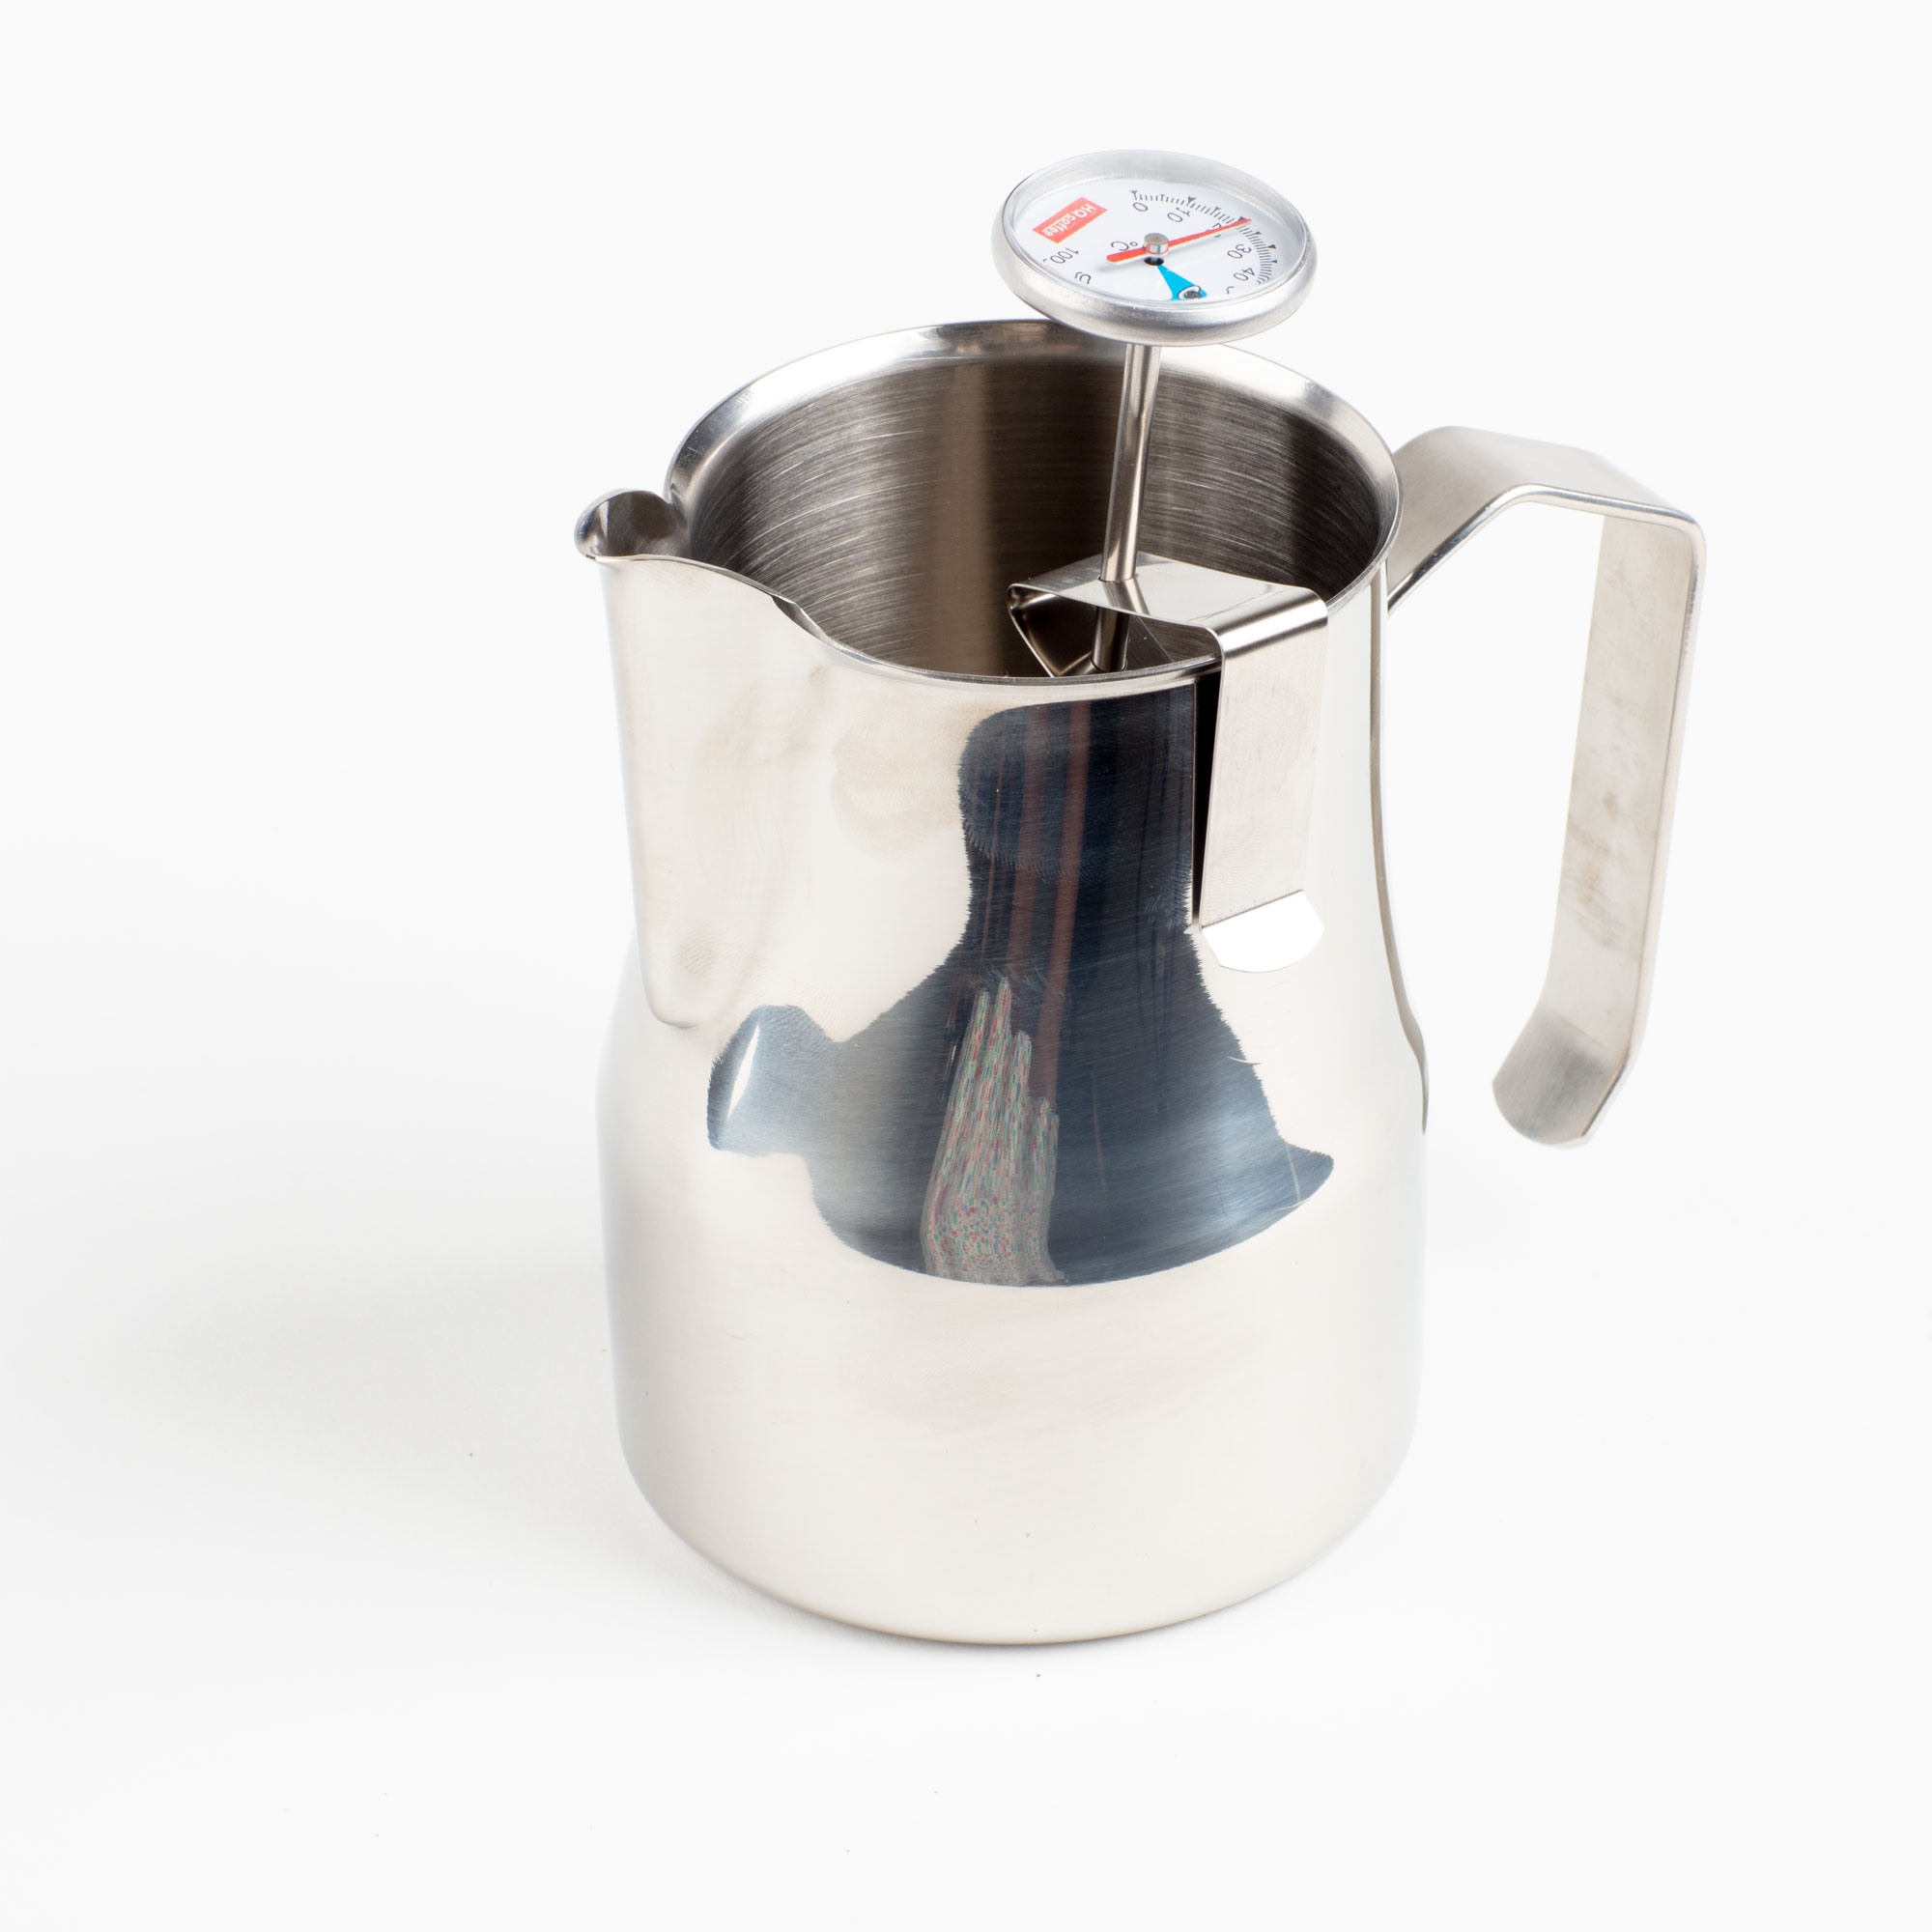 https://www.kaffebox.no/wp-content/uploads/2022/05/thermometer-in-pitcher-1.jpg